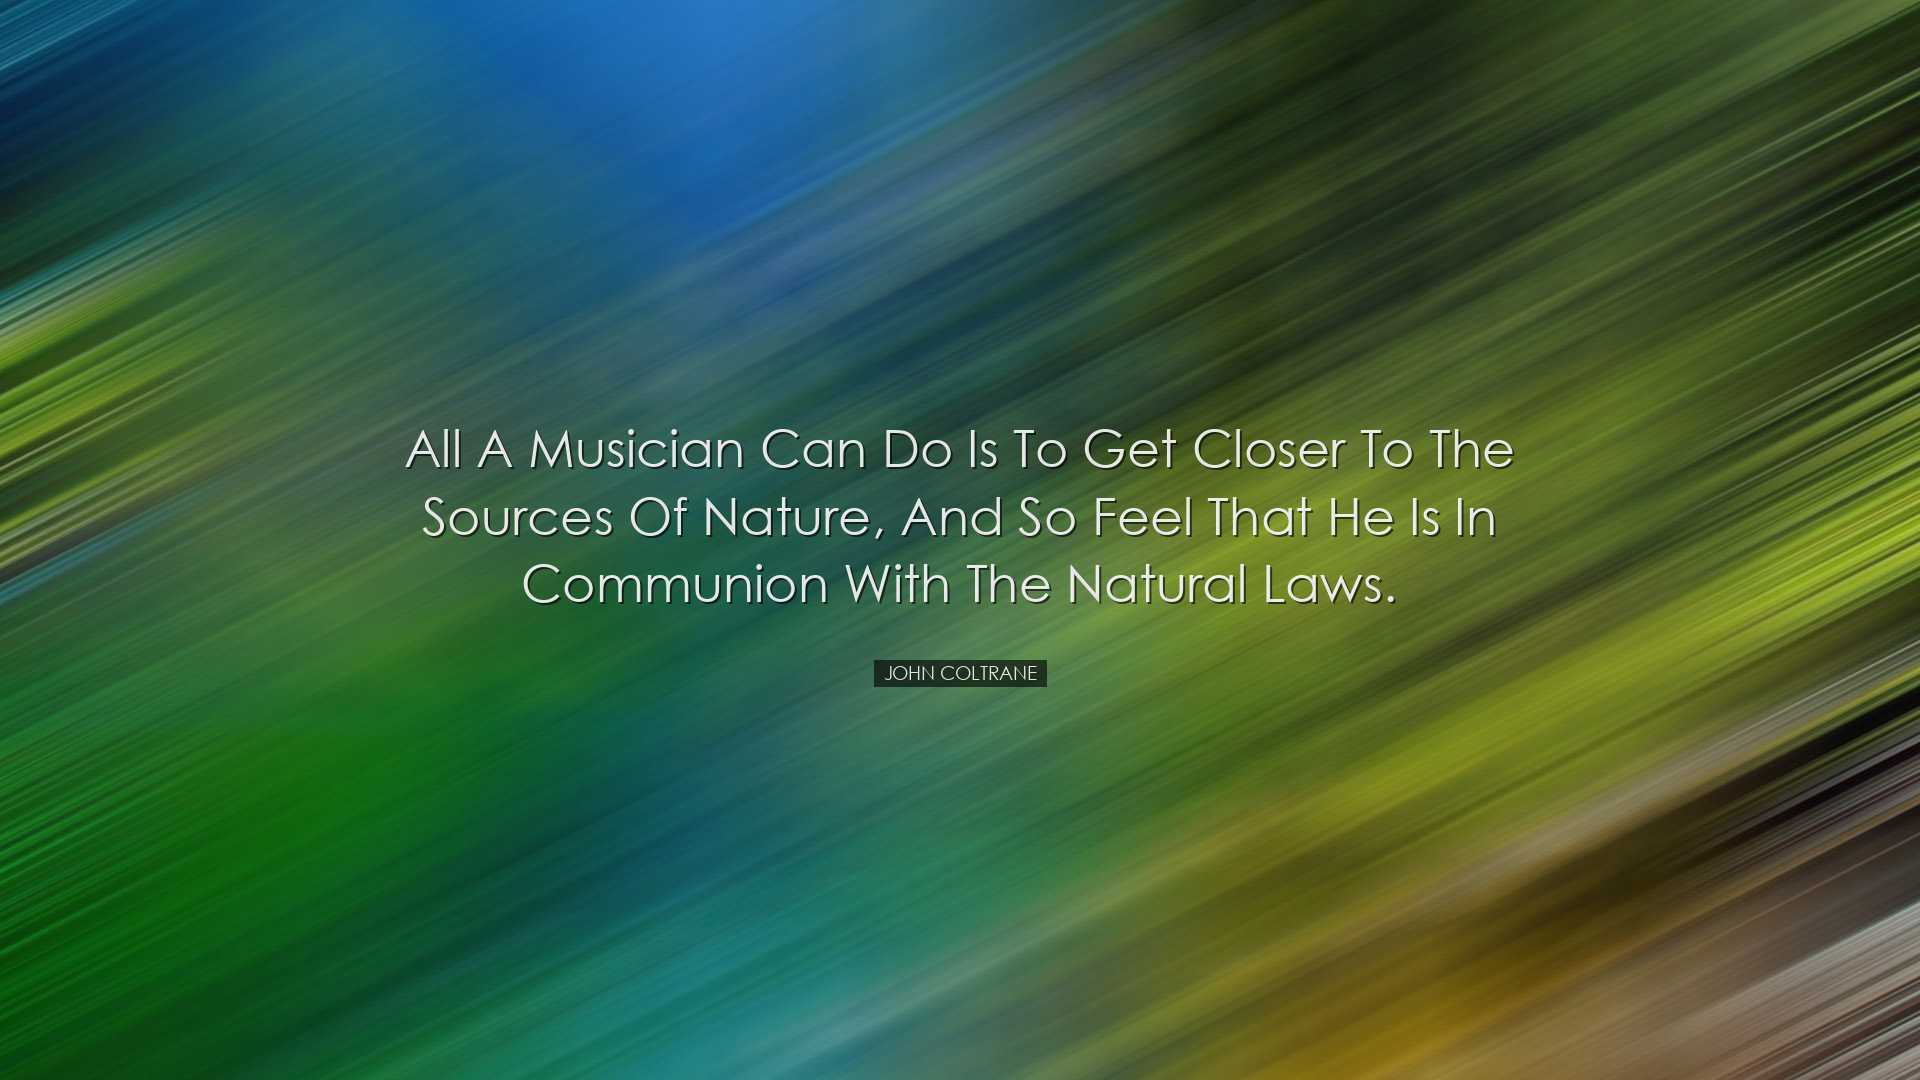 All a musician can do is to get closer to the sources of nature, a